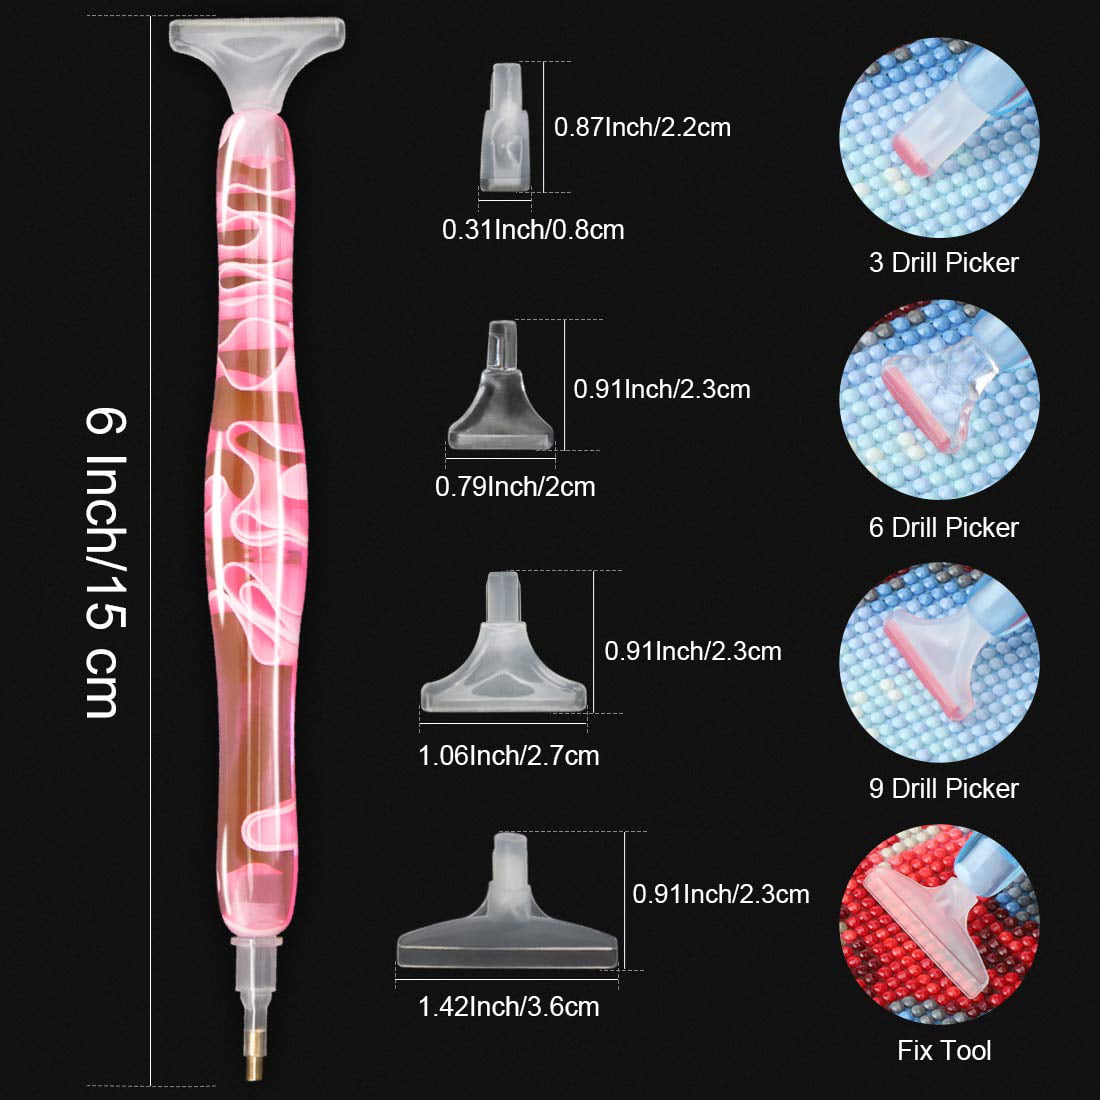 Diamond Painting Pen Handmade Resin Diamond Painting Pens with Glue Clay and Various Tips More Comfortable and Faster 5D Diamond Painting Tools